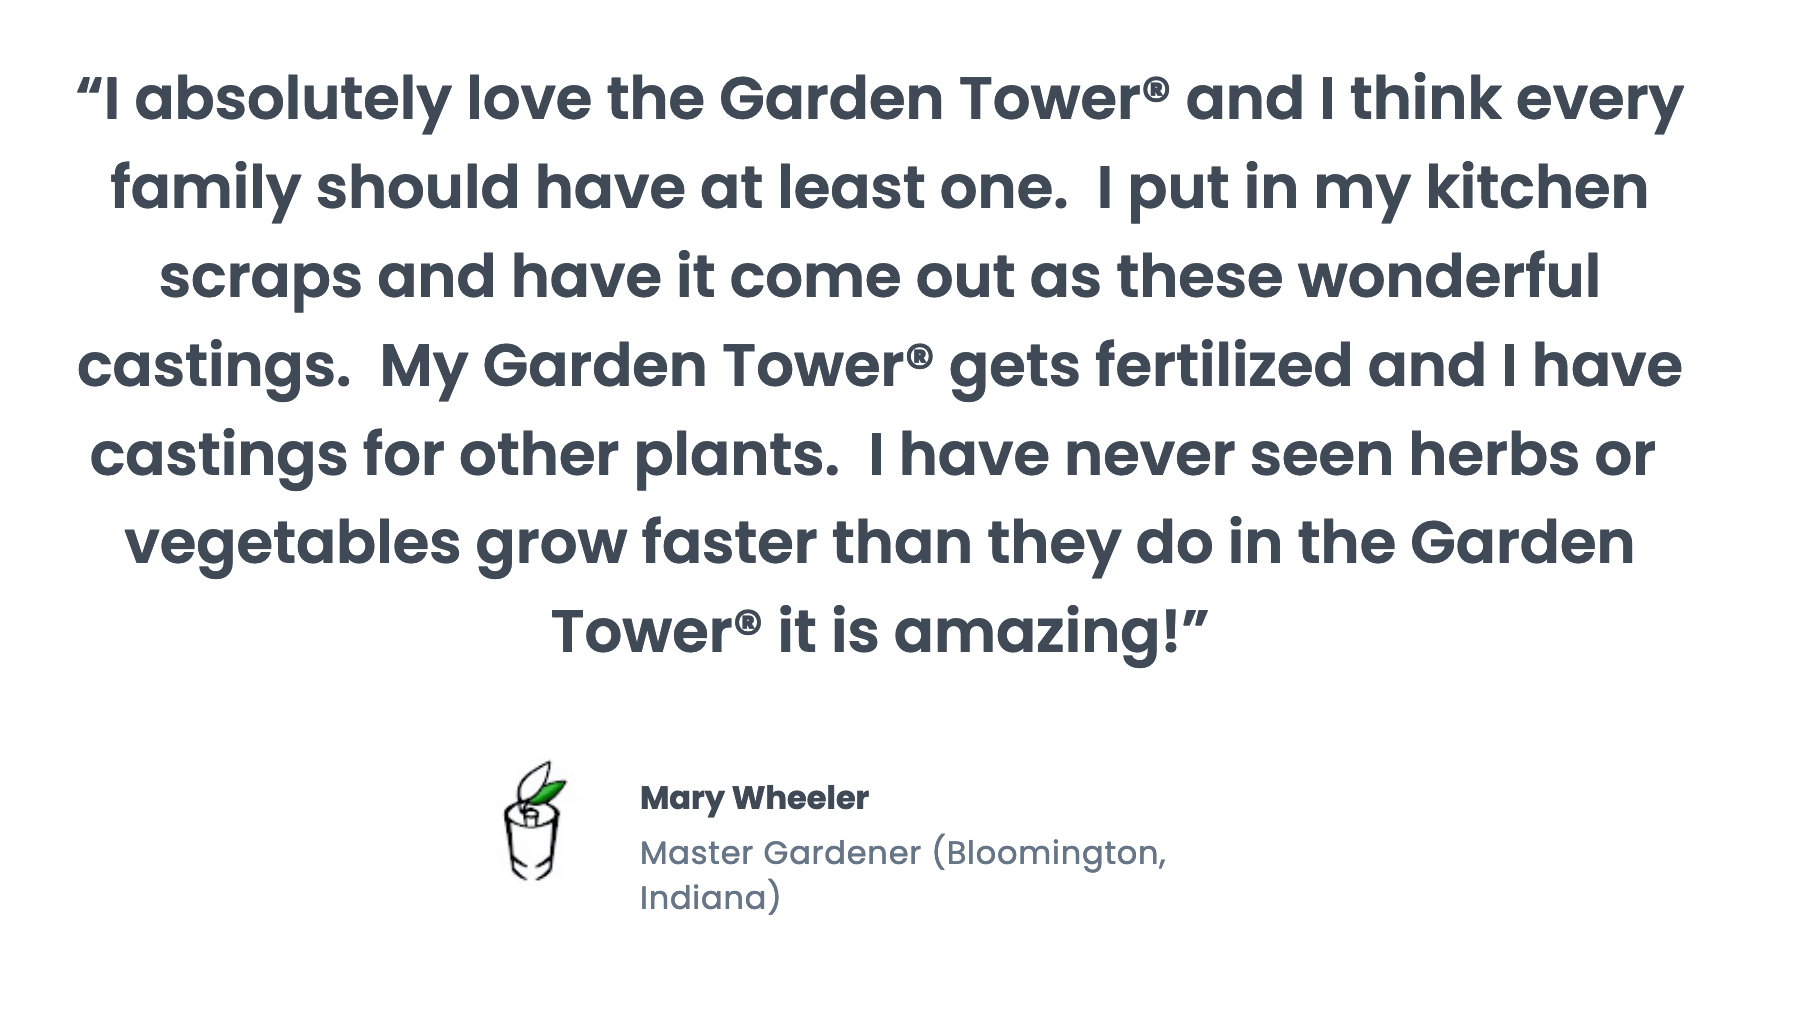 2nd review of the Garden Tower